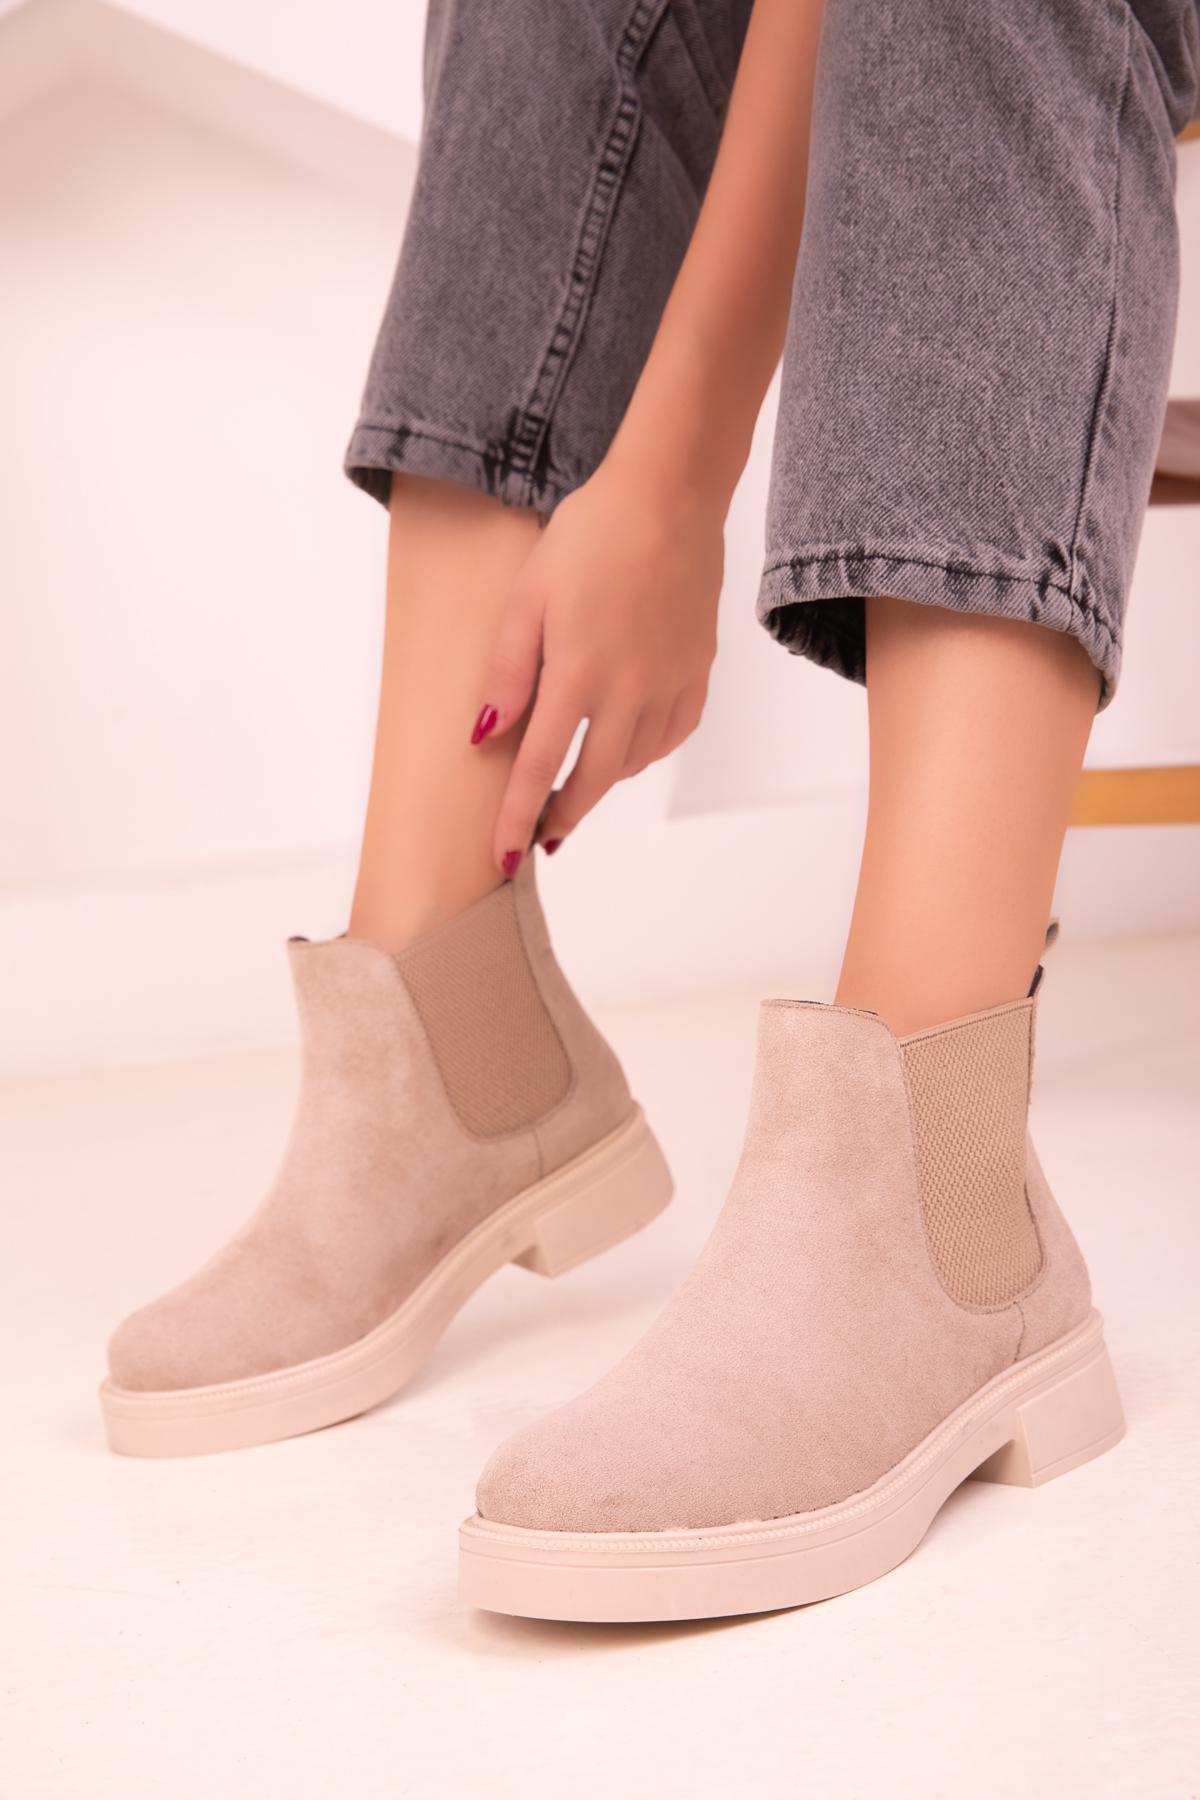 SOHO - Beige Ankle Suede Boots